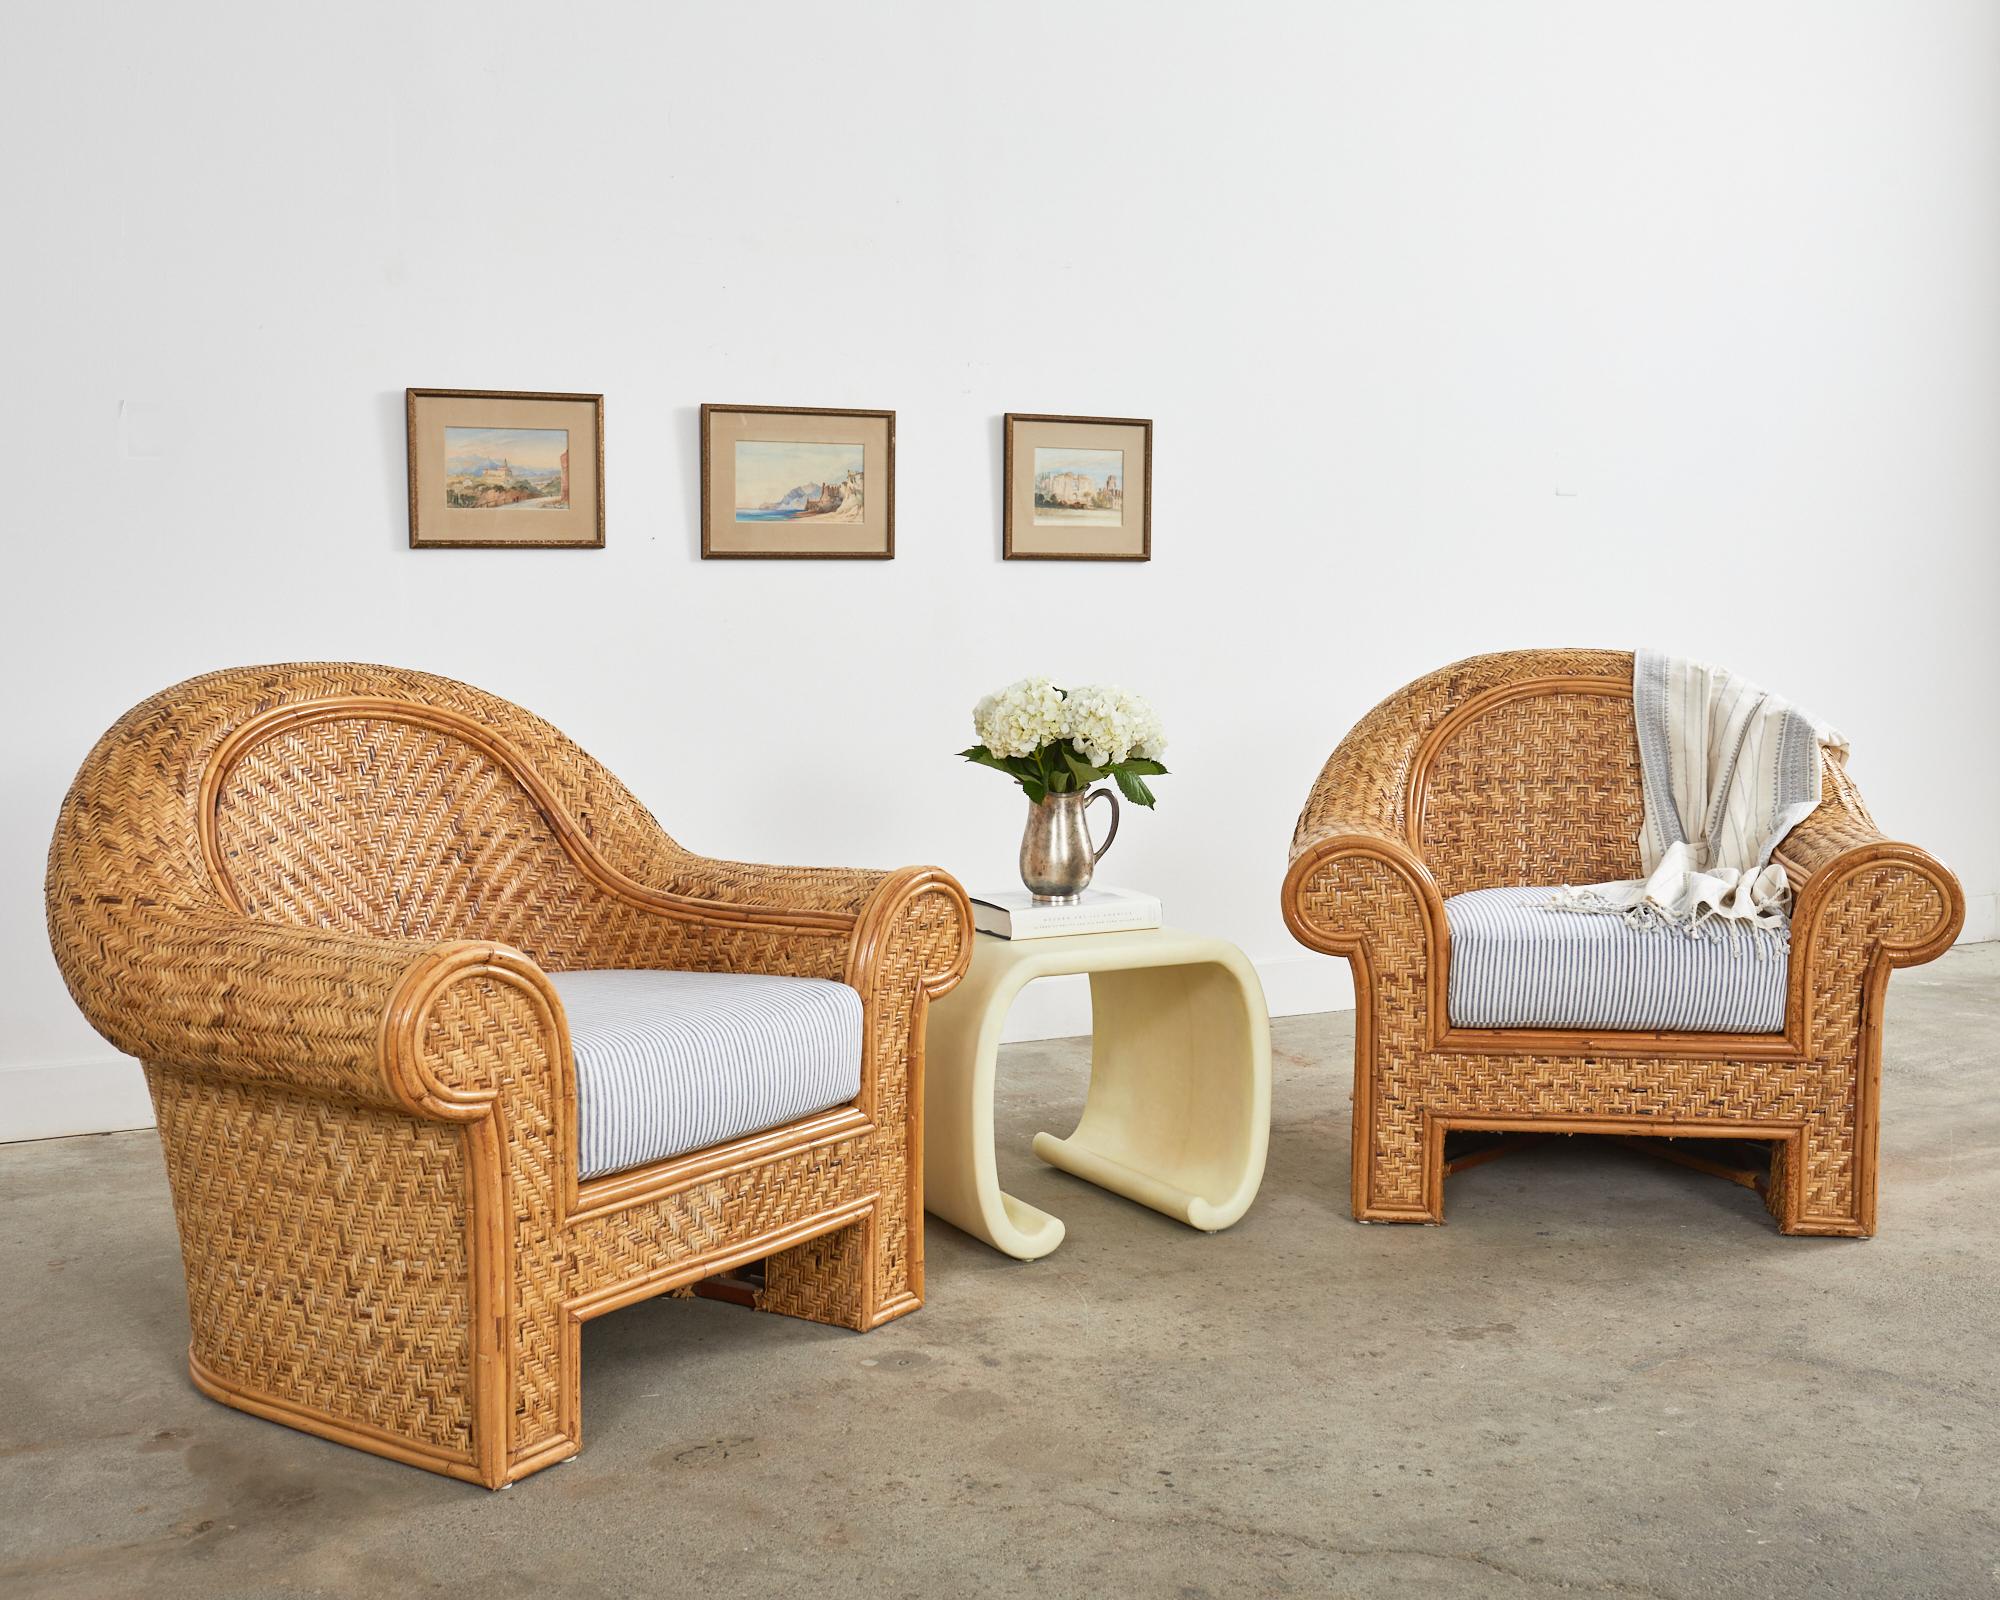 Gorgeous pair of oversized organic modern lounge chairs featuring a woven seagrass style rattan wicker covered frame. Produced by O-Asian for Ralph Lauren Home. The large frame is constructed from rattan poles with wood and covered with woven rattan